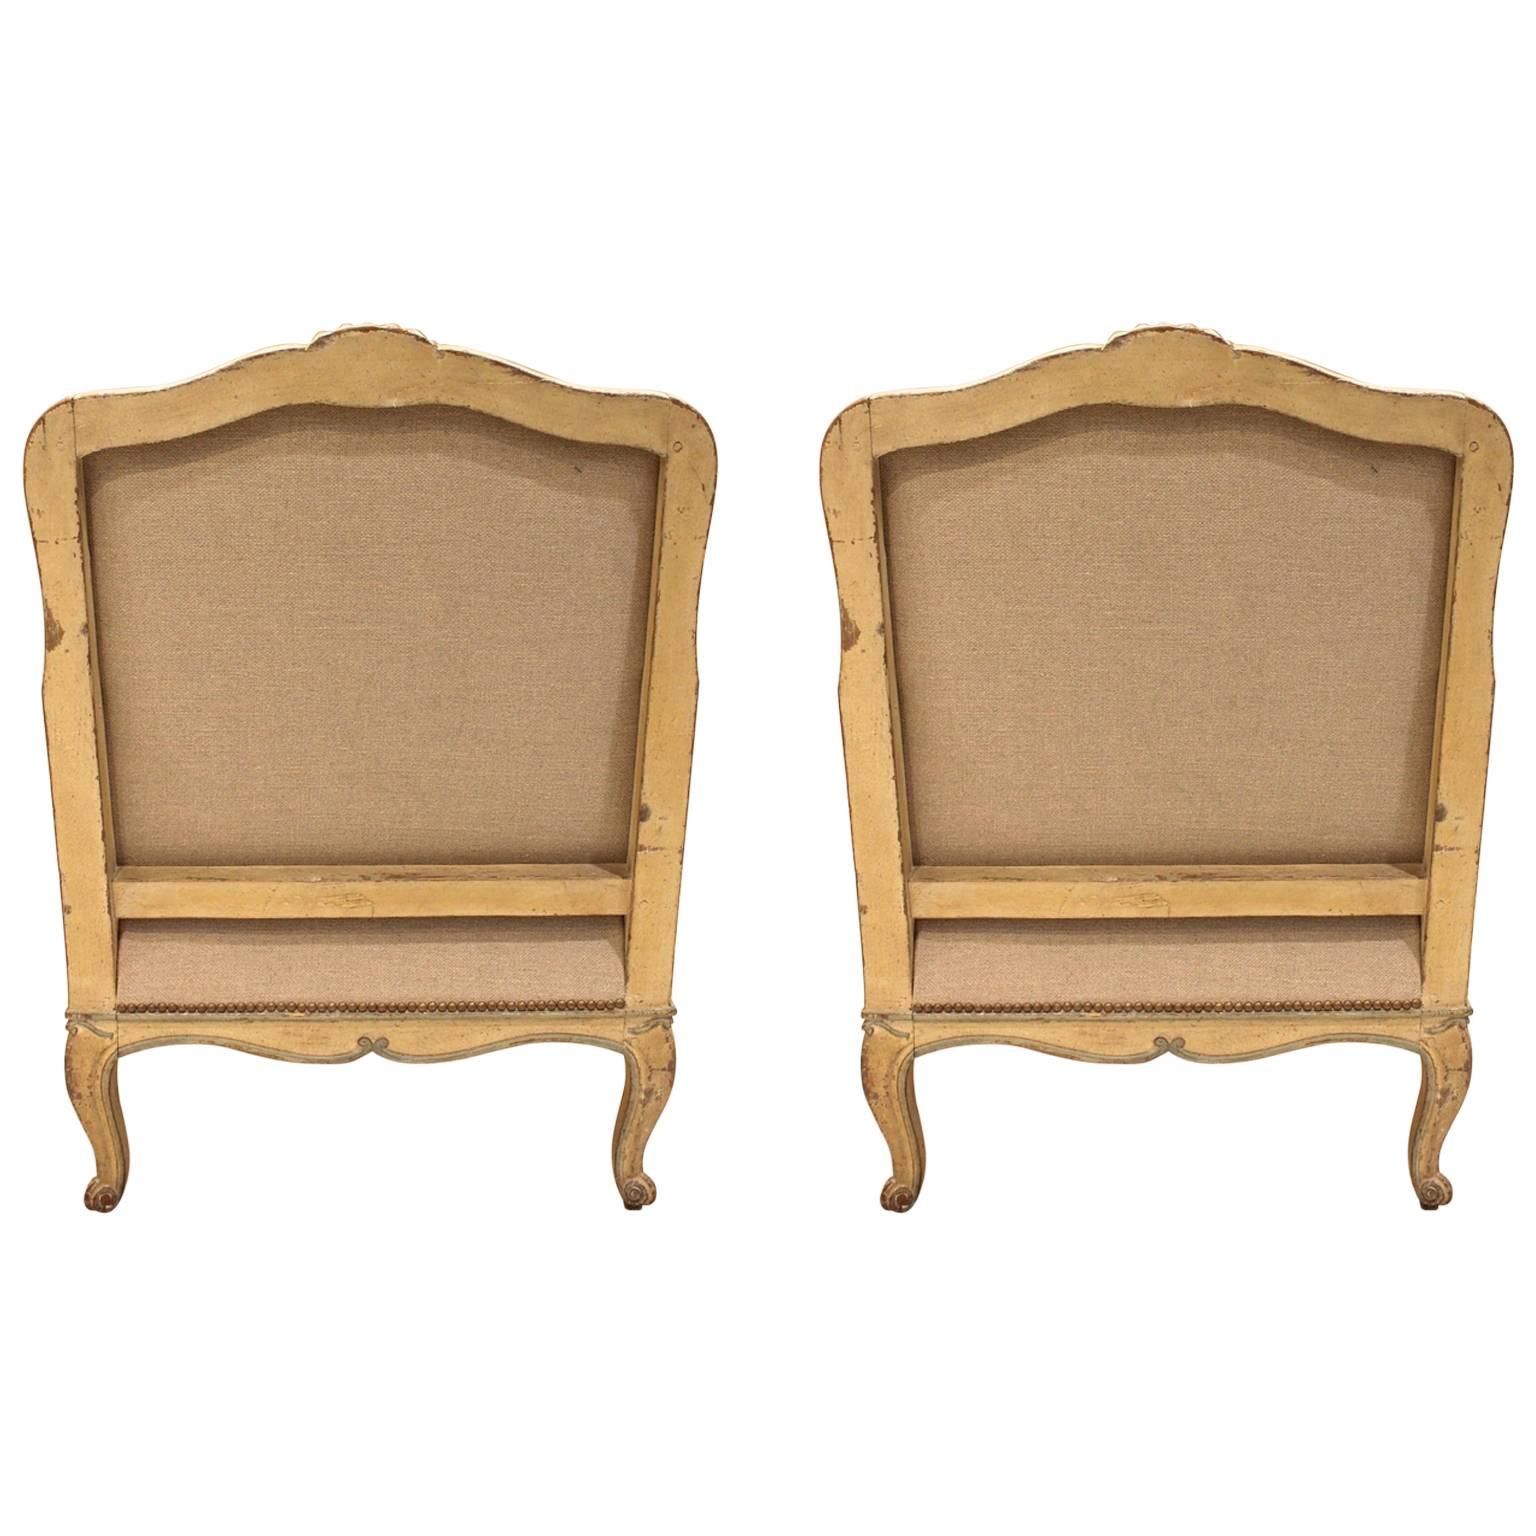 Pair of antique French early 19th century Louis XV bergeres, with detailed carvings, curved legs, curved top and skirt, and French paint, completely taken down and reupholstered with French linen in Provence.